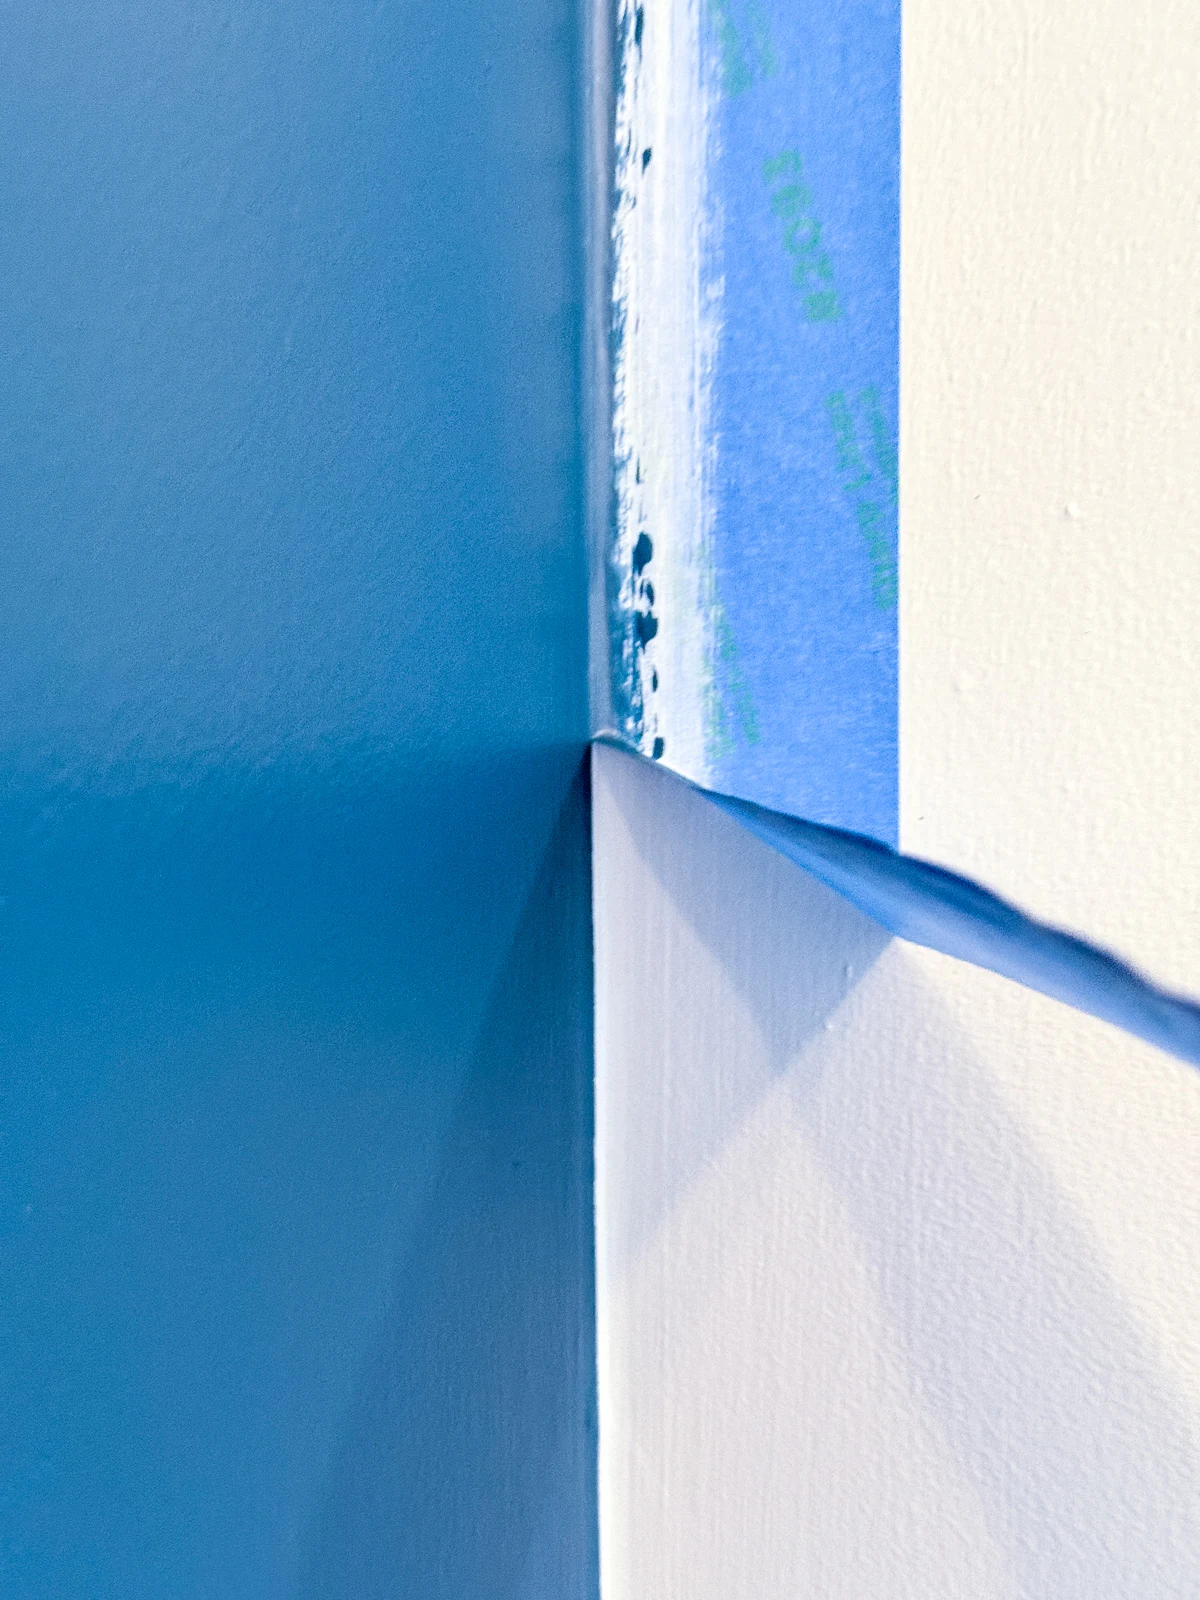 removing painter's tape along accent wall to reveal straight line at the corner